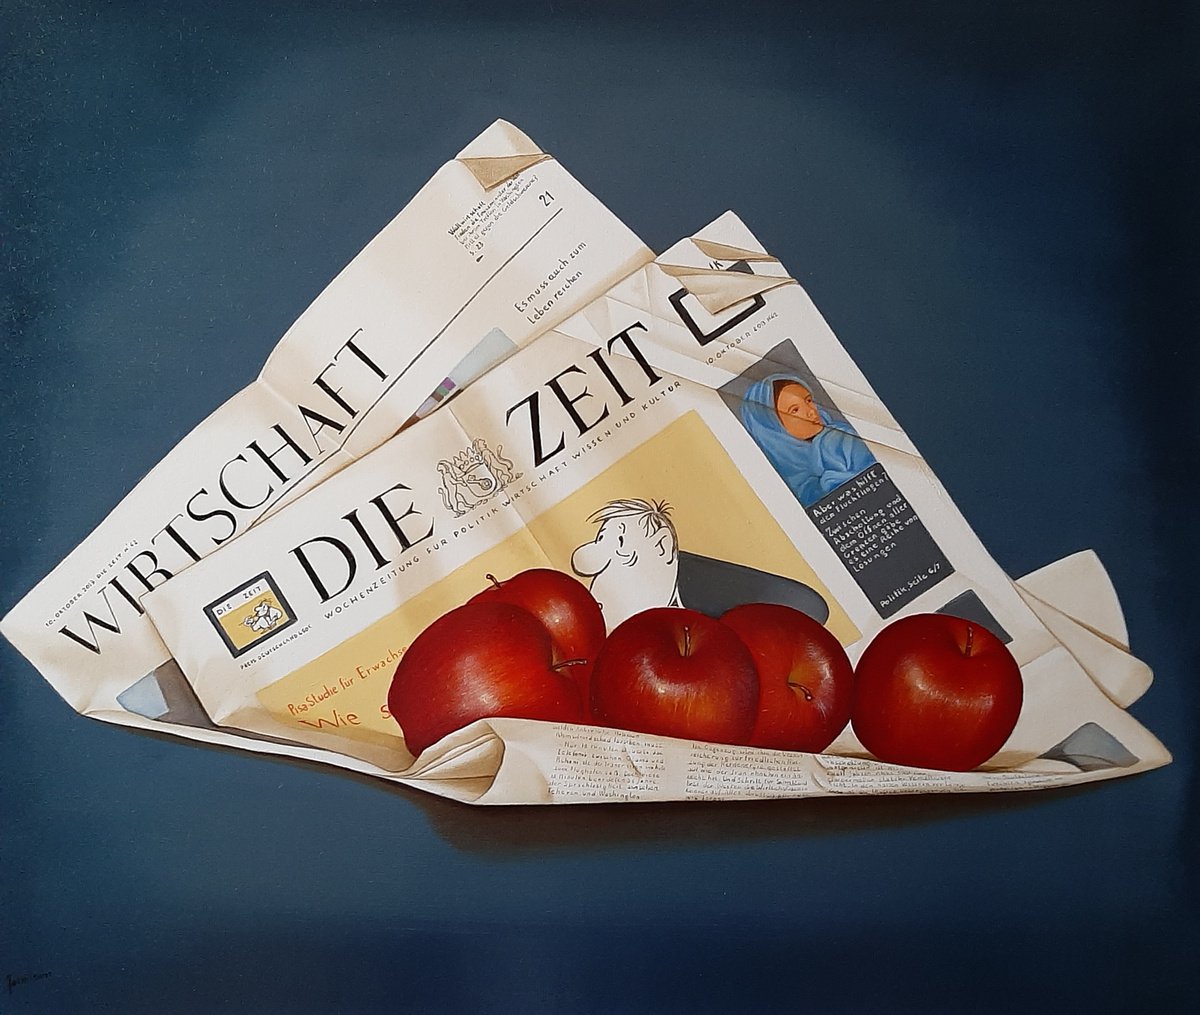 Newspaper with apples by olga formisano